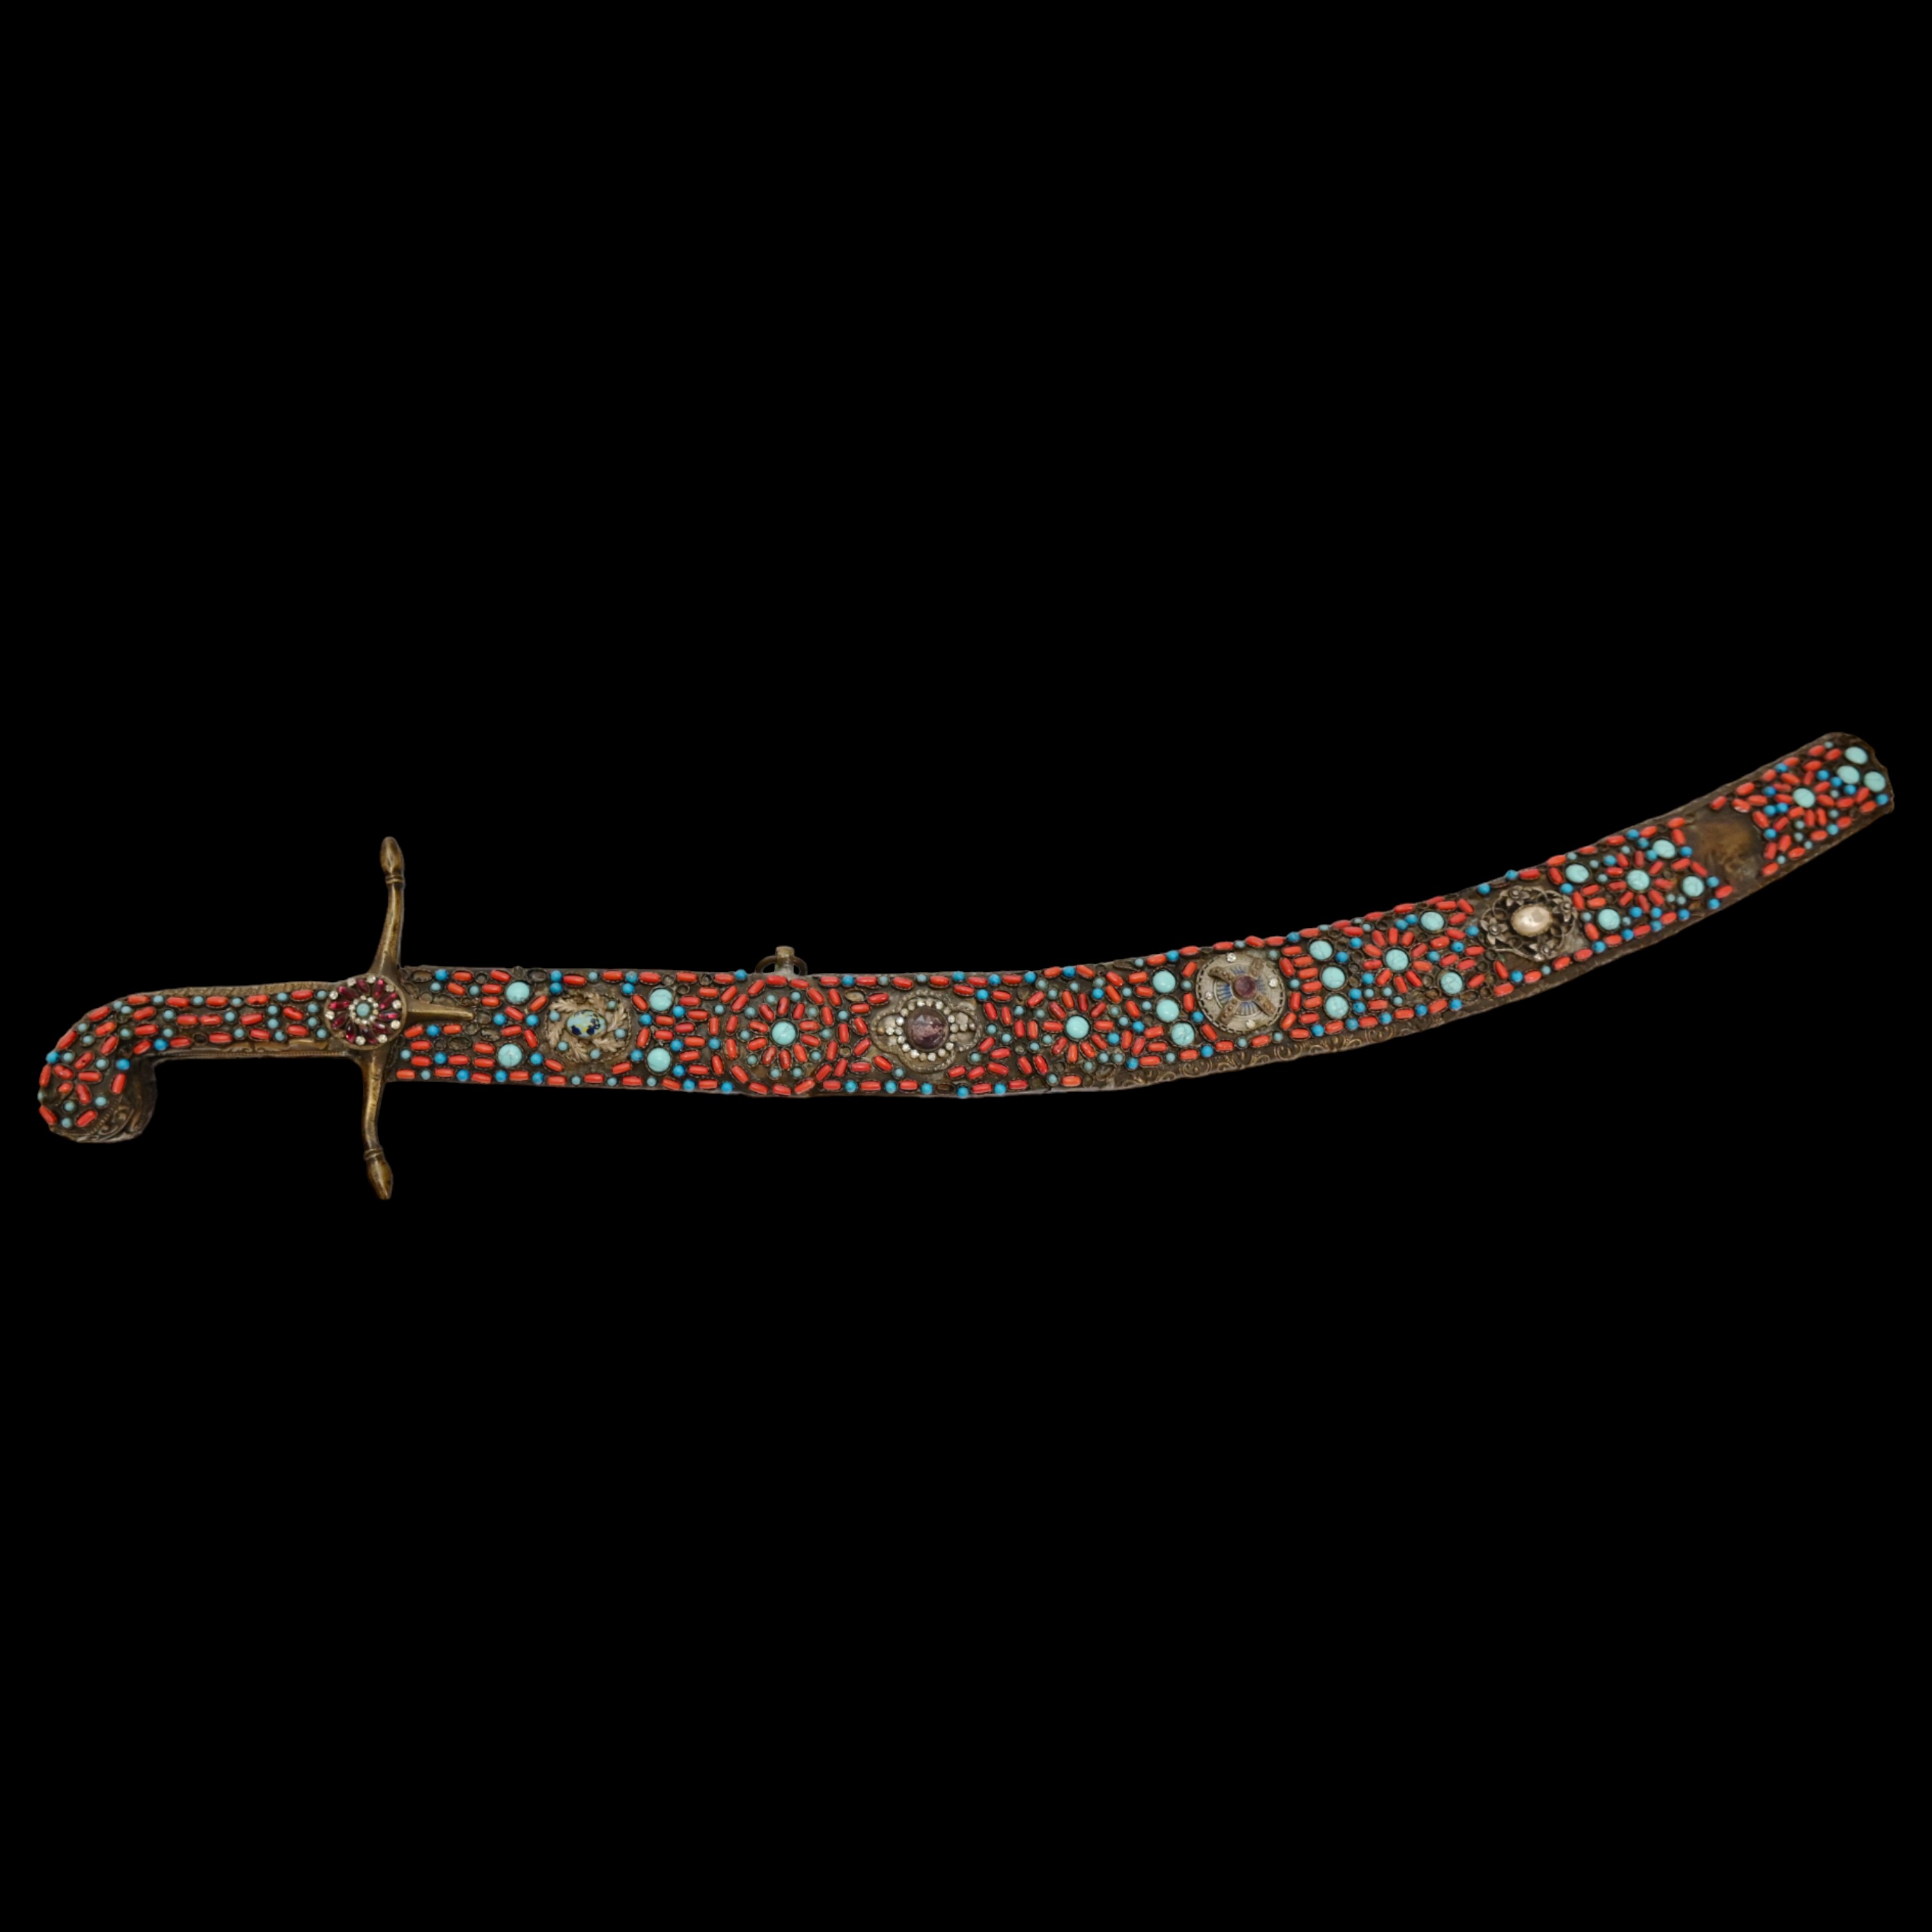 Rare Ottoman sword, Kilij, Pala, decorated with corals and turquoise, Turkey, Trabzon, around 1800. - Image 17 of 31